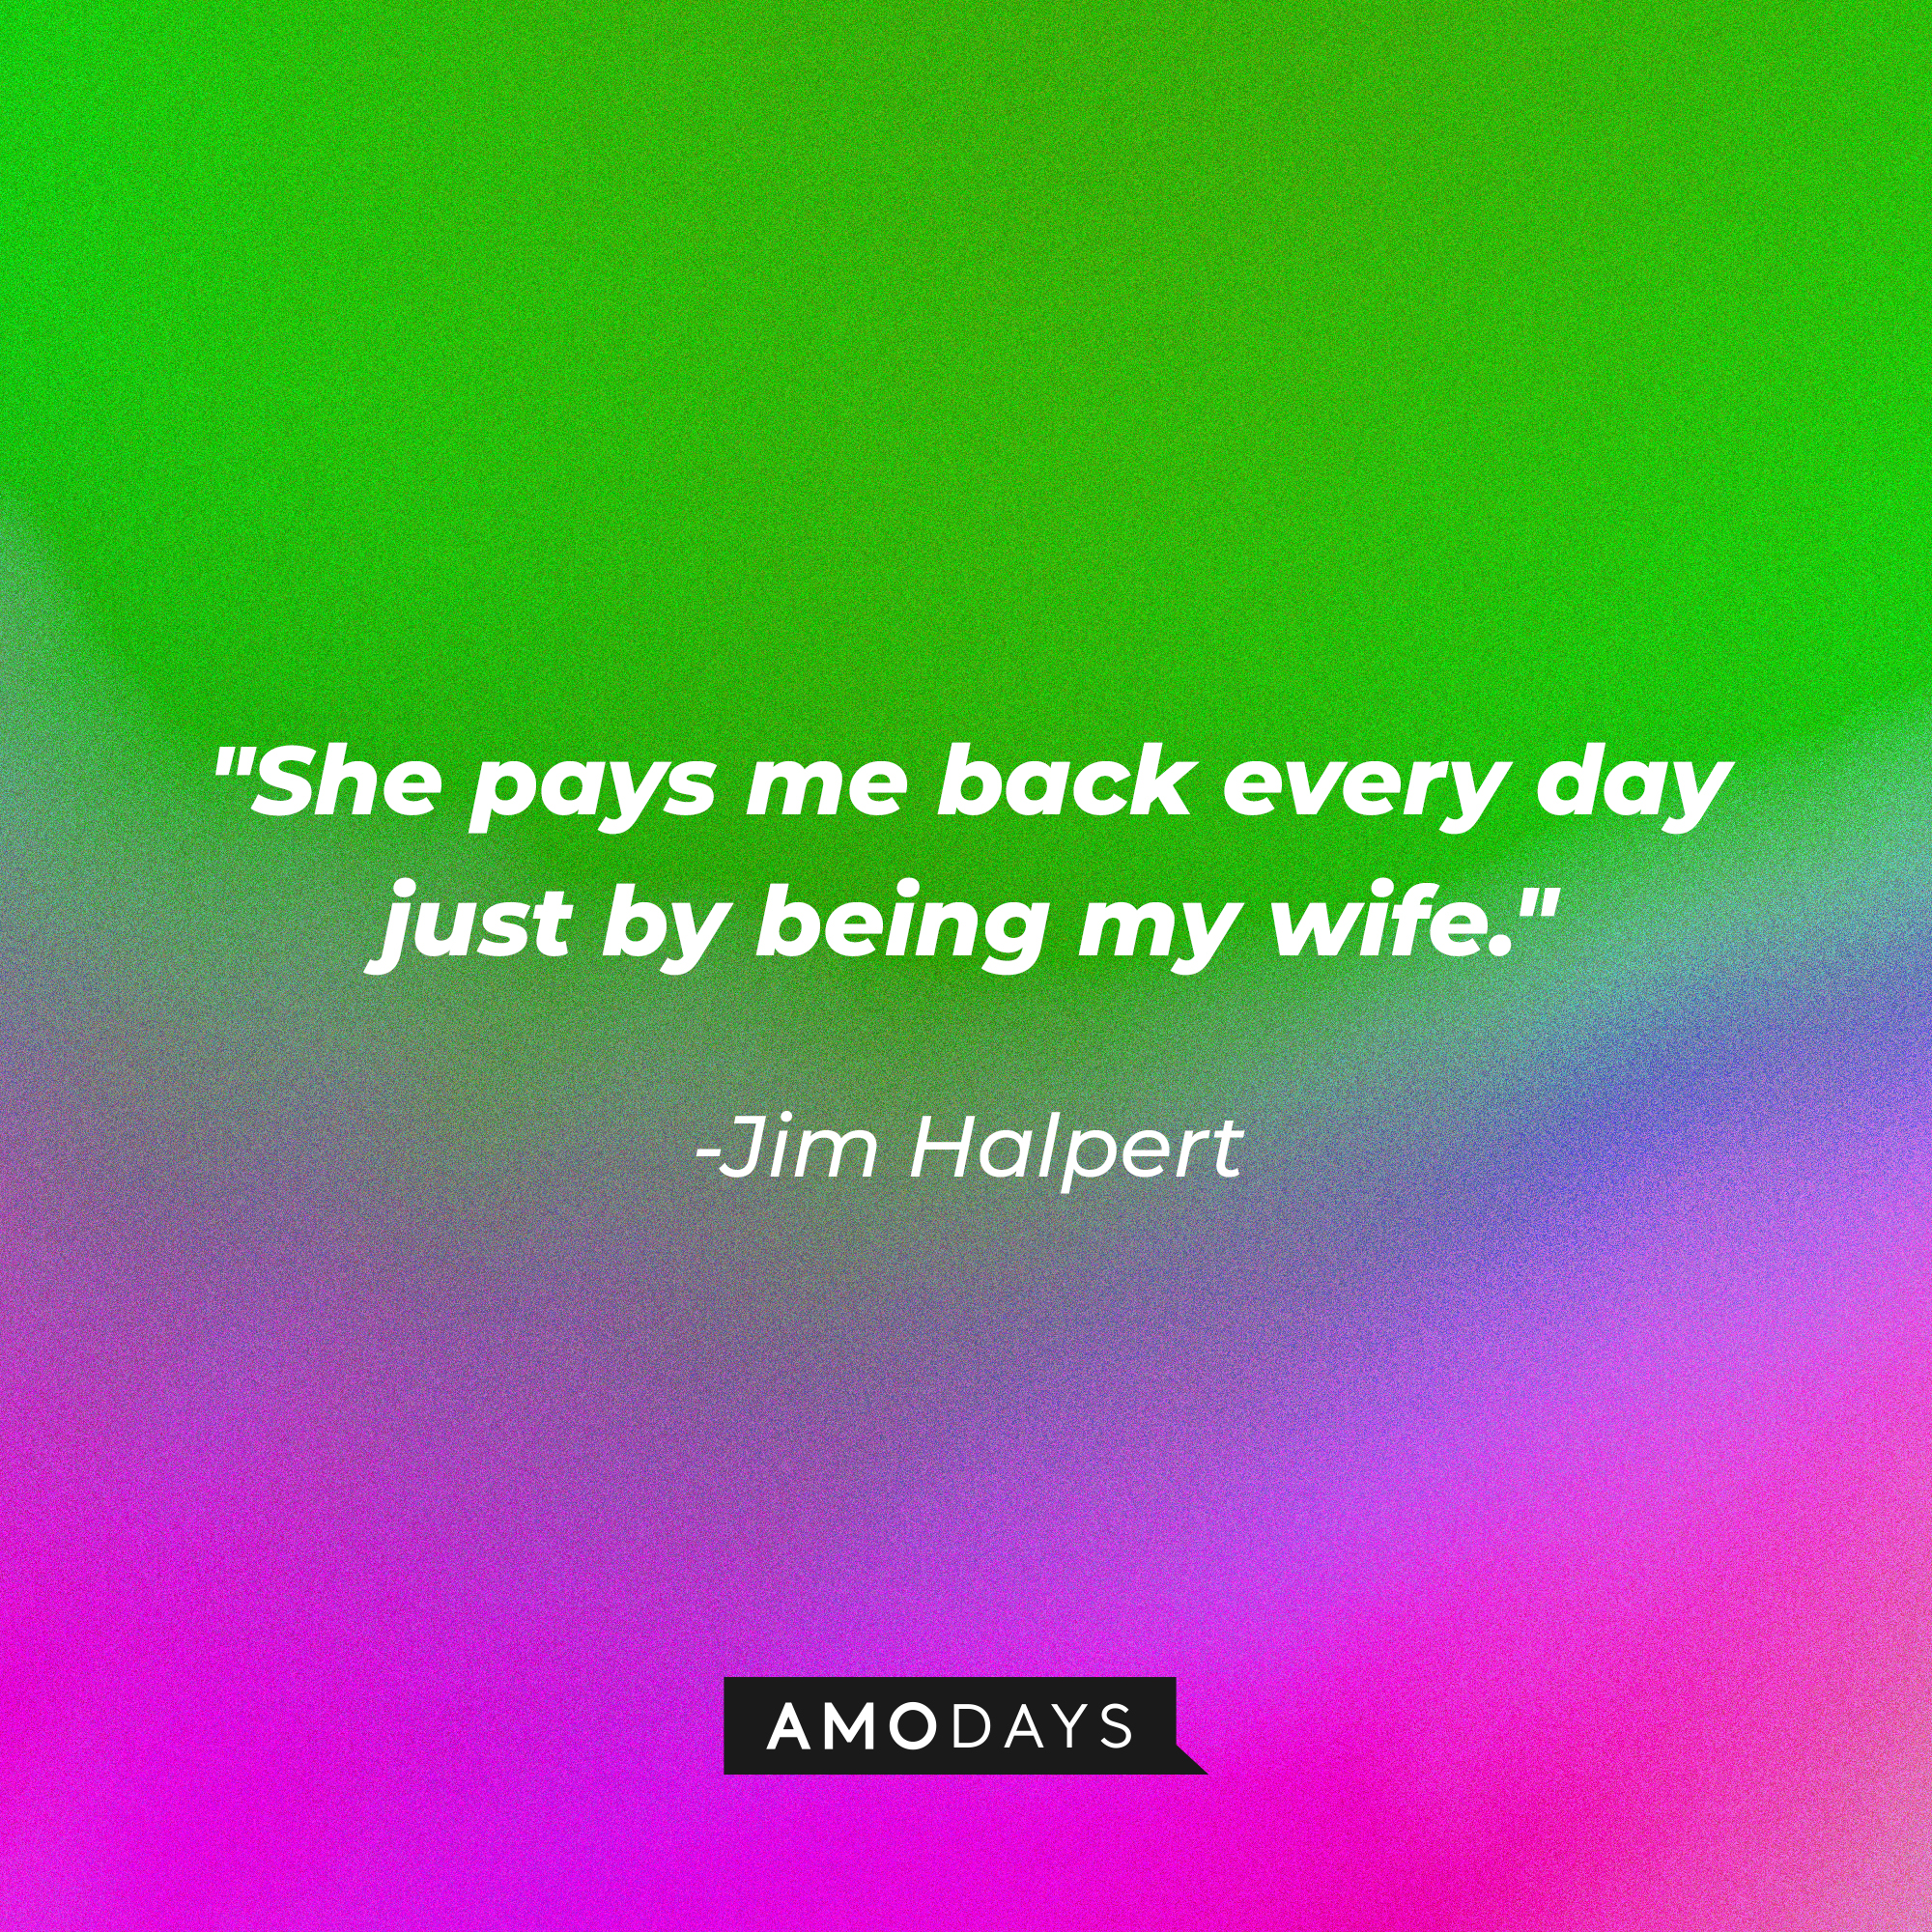 Jim Halpert’s quote: "She pays me back every day just by being my wife." | Image: AmoDays